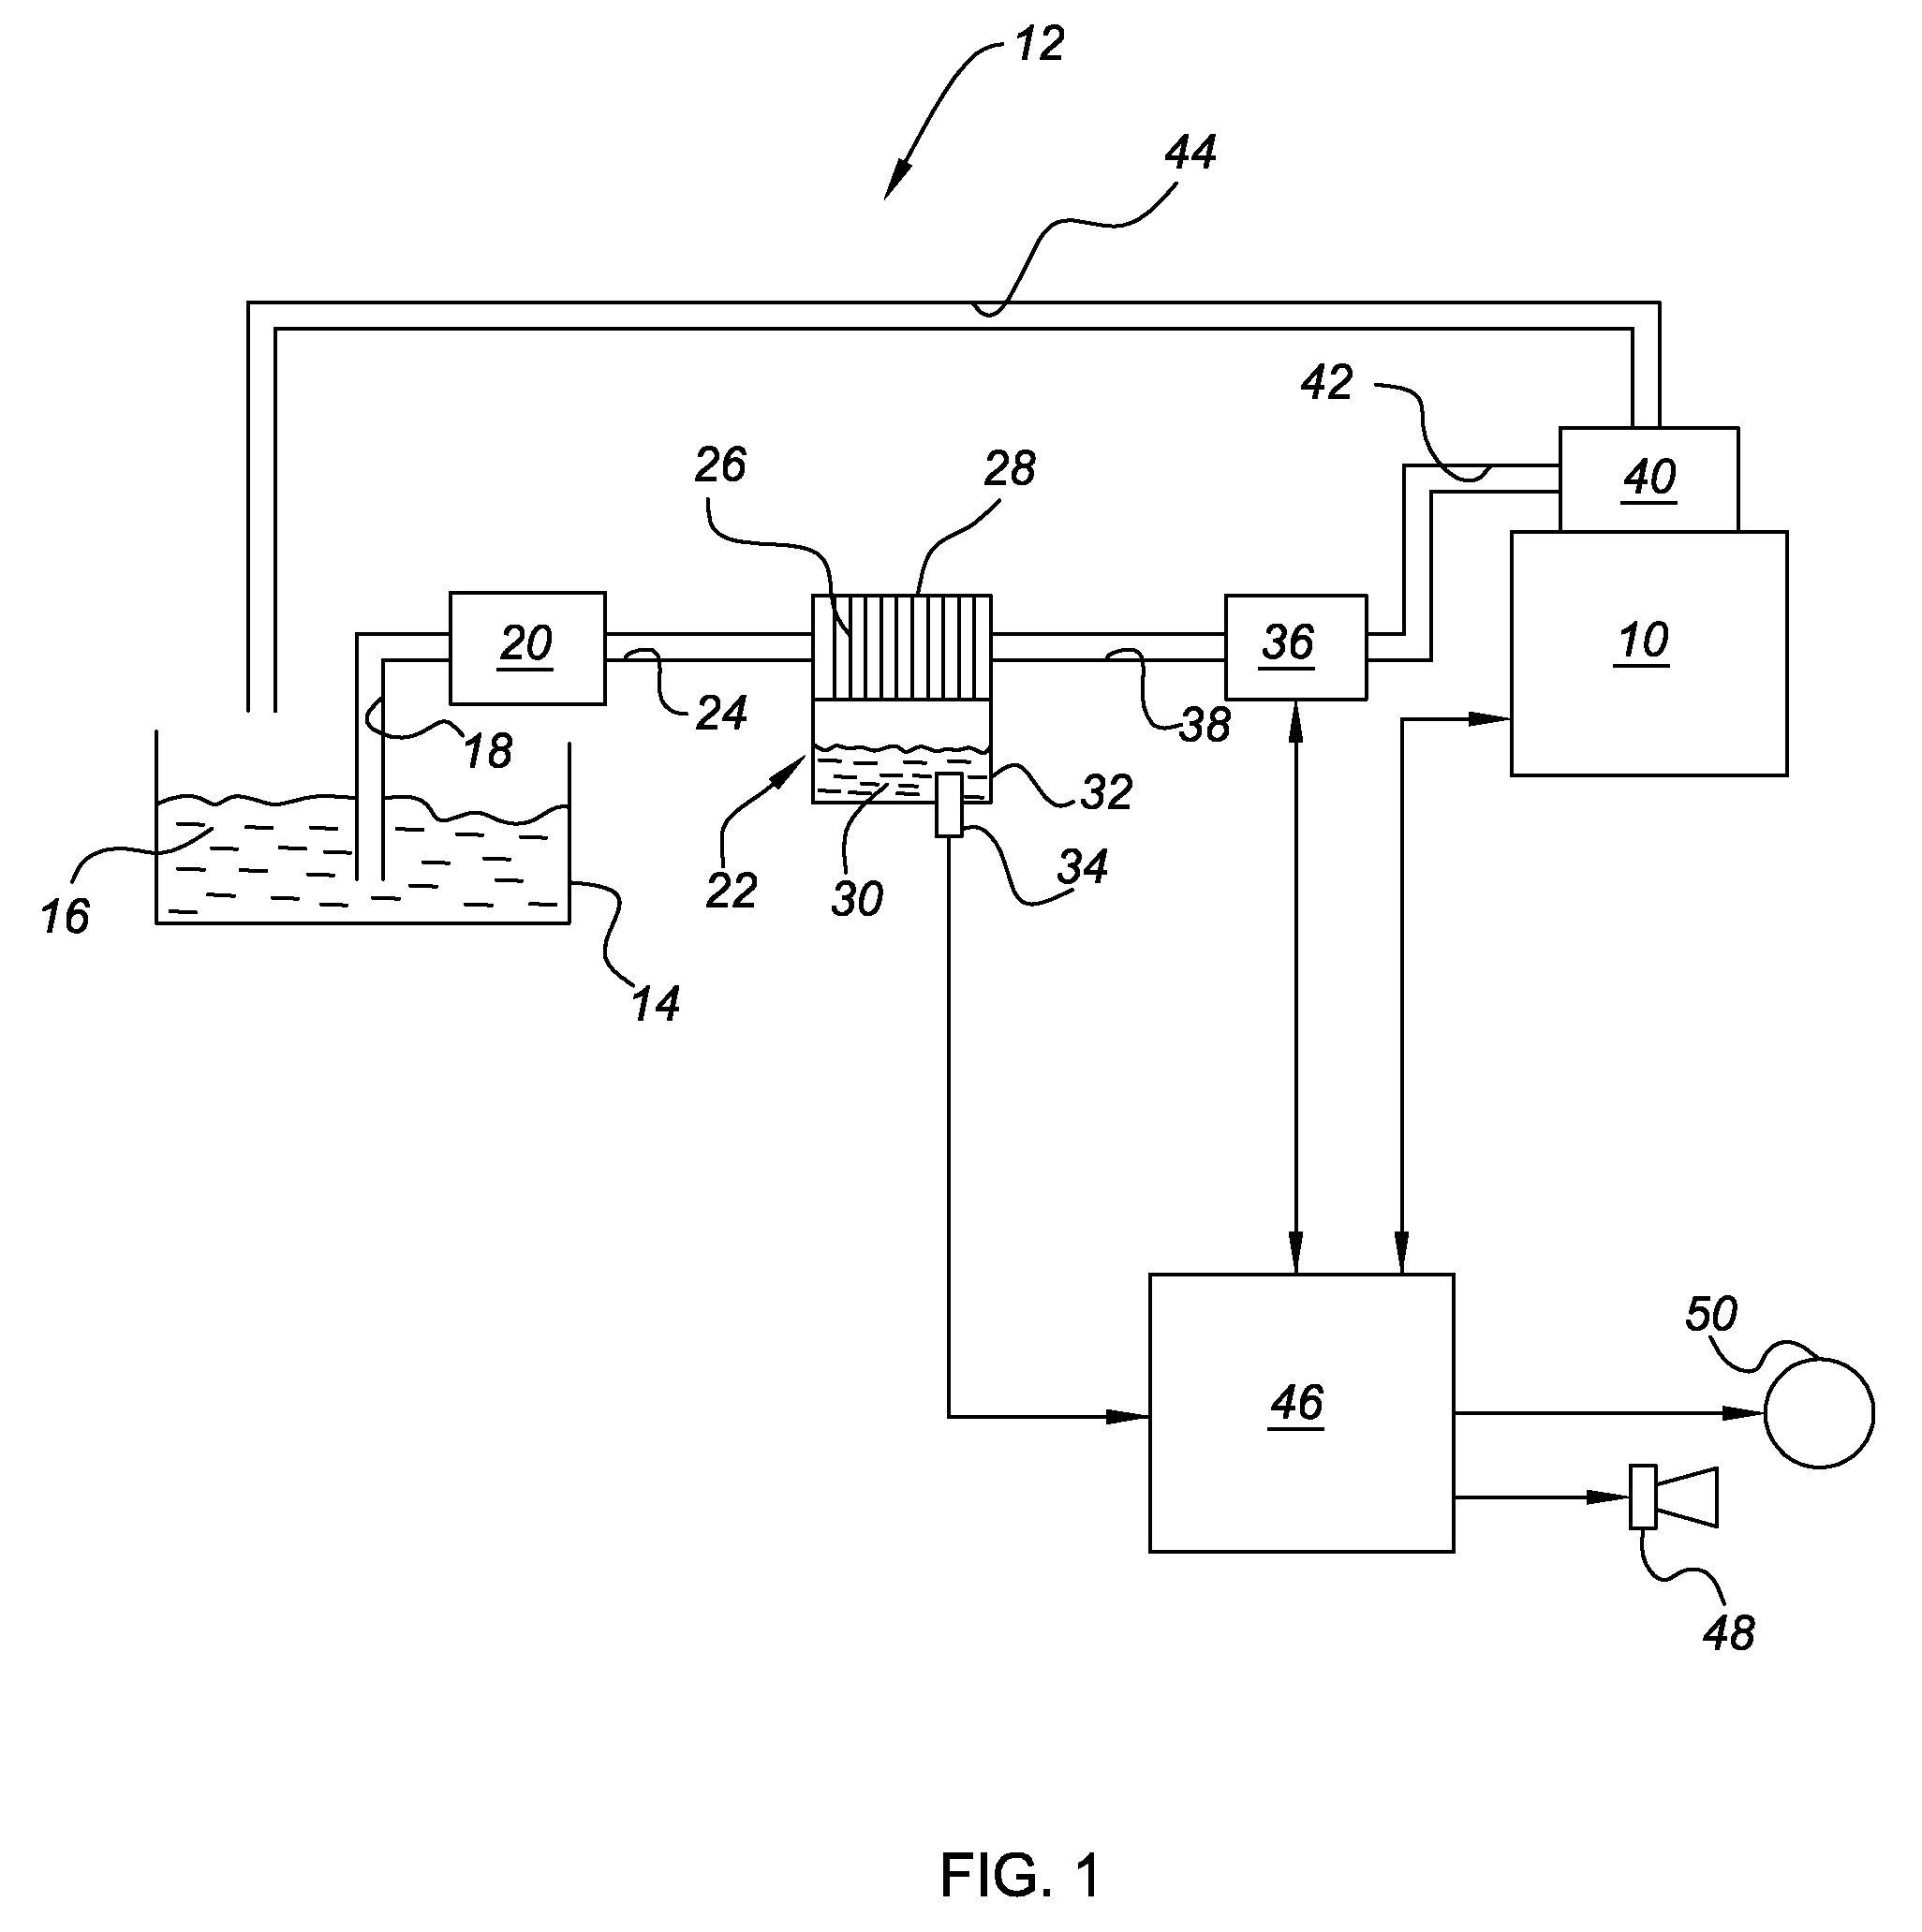 Apparatus and method for sensing water within a fuel-water separator assembly